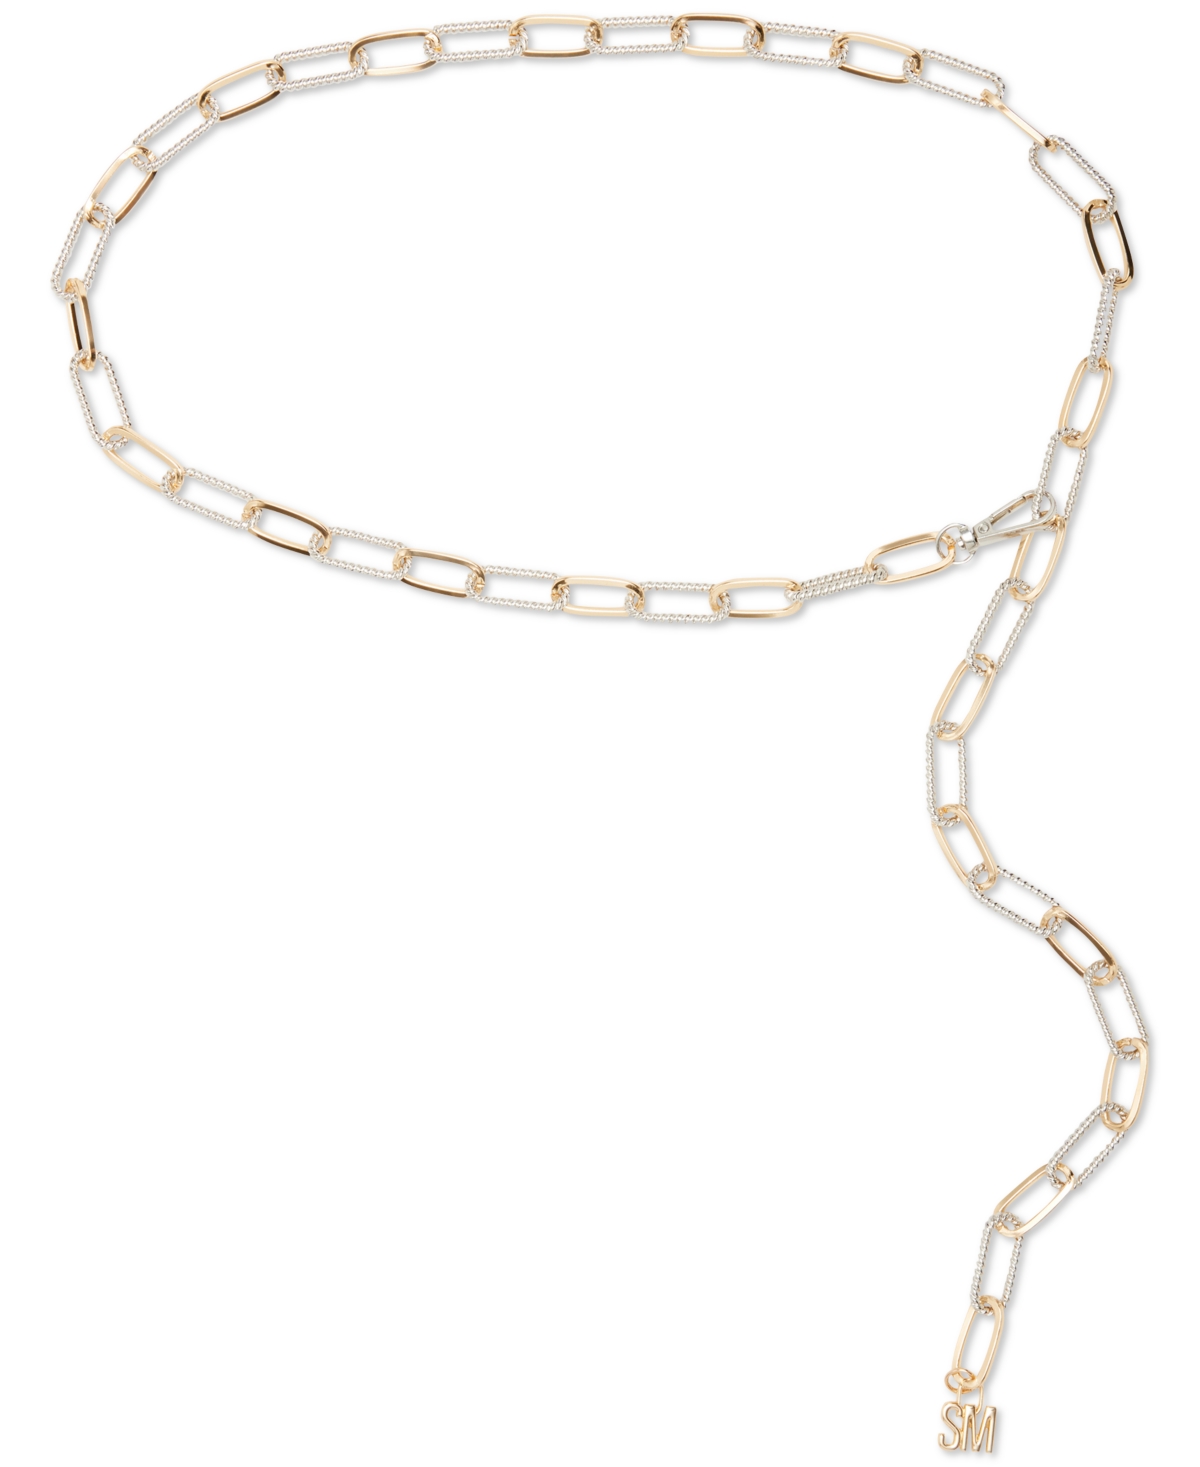 Women's Two-Tone Paperclip Chain Belt - Gold/silver